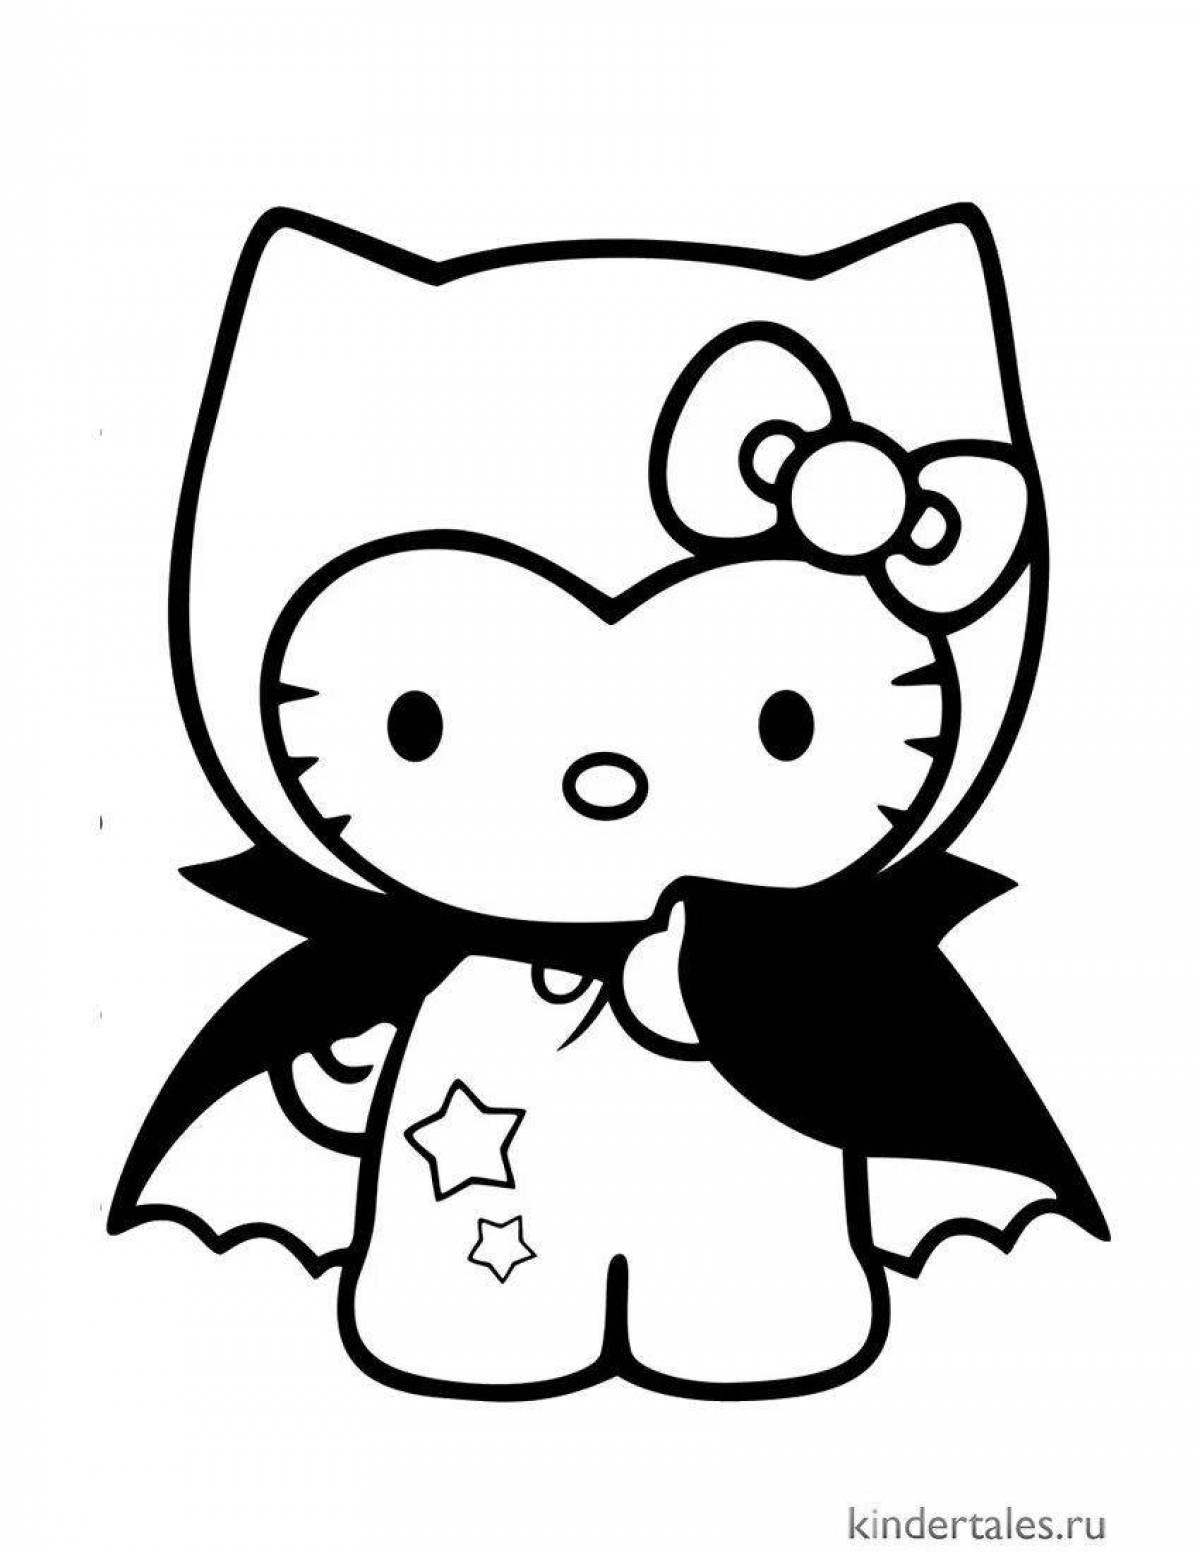 Halloween kitty ghost coloring page